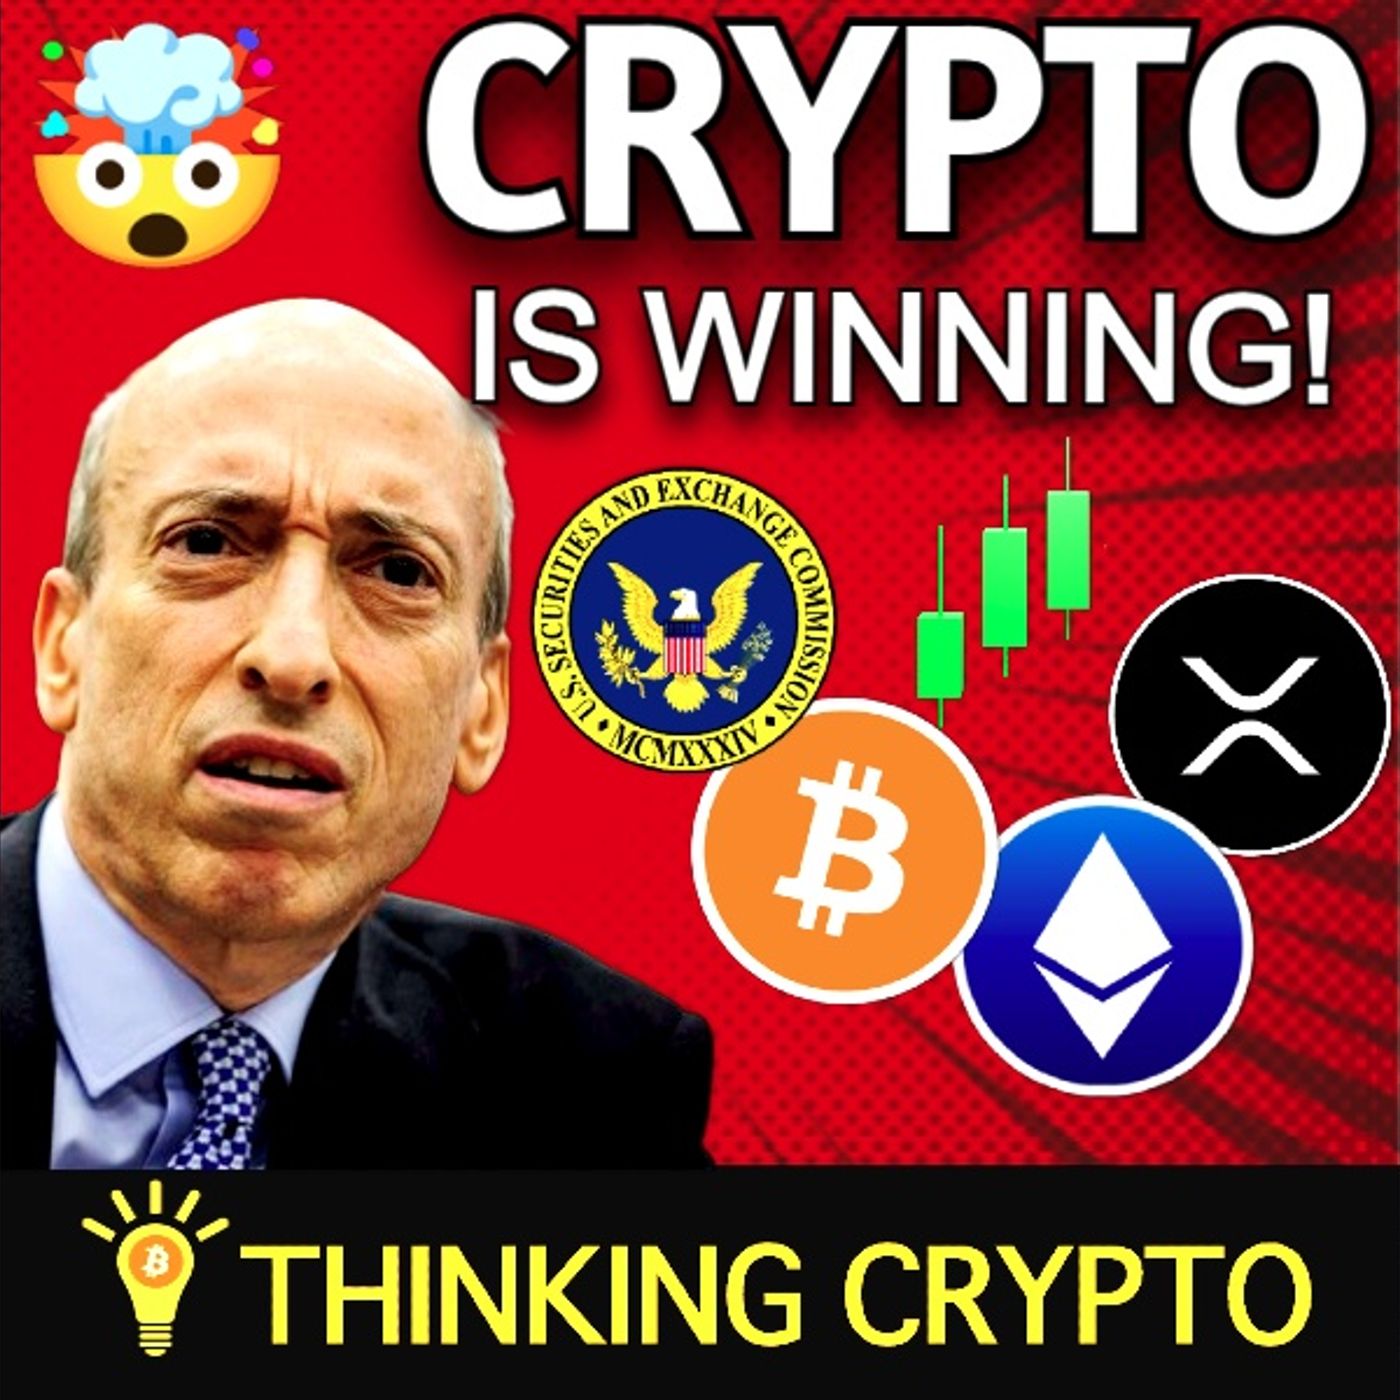 🚨CRYPTO IS BEATING SEC GARY GENSLER! SEC BUDGET CUTS & OFFICE CLOSES AFTER DEBTBOX FALLOUT!